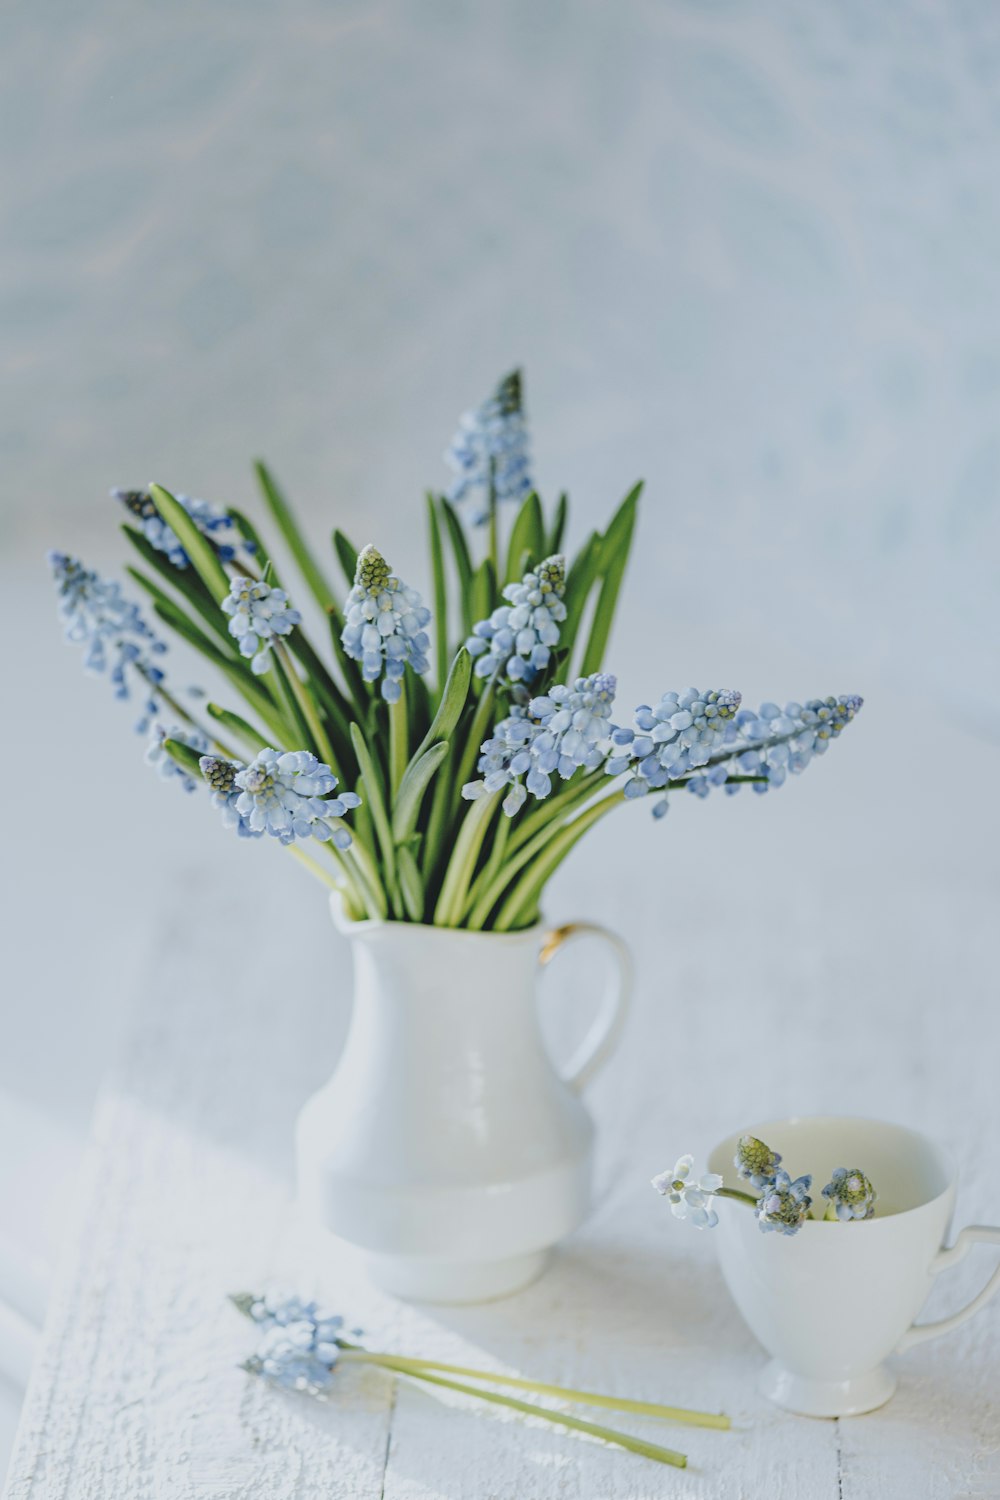 a white vase filled with blue flowers next to a cup